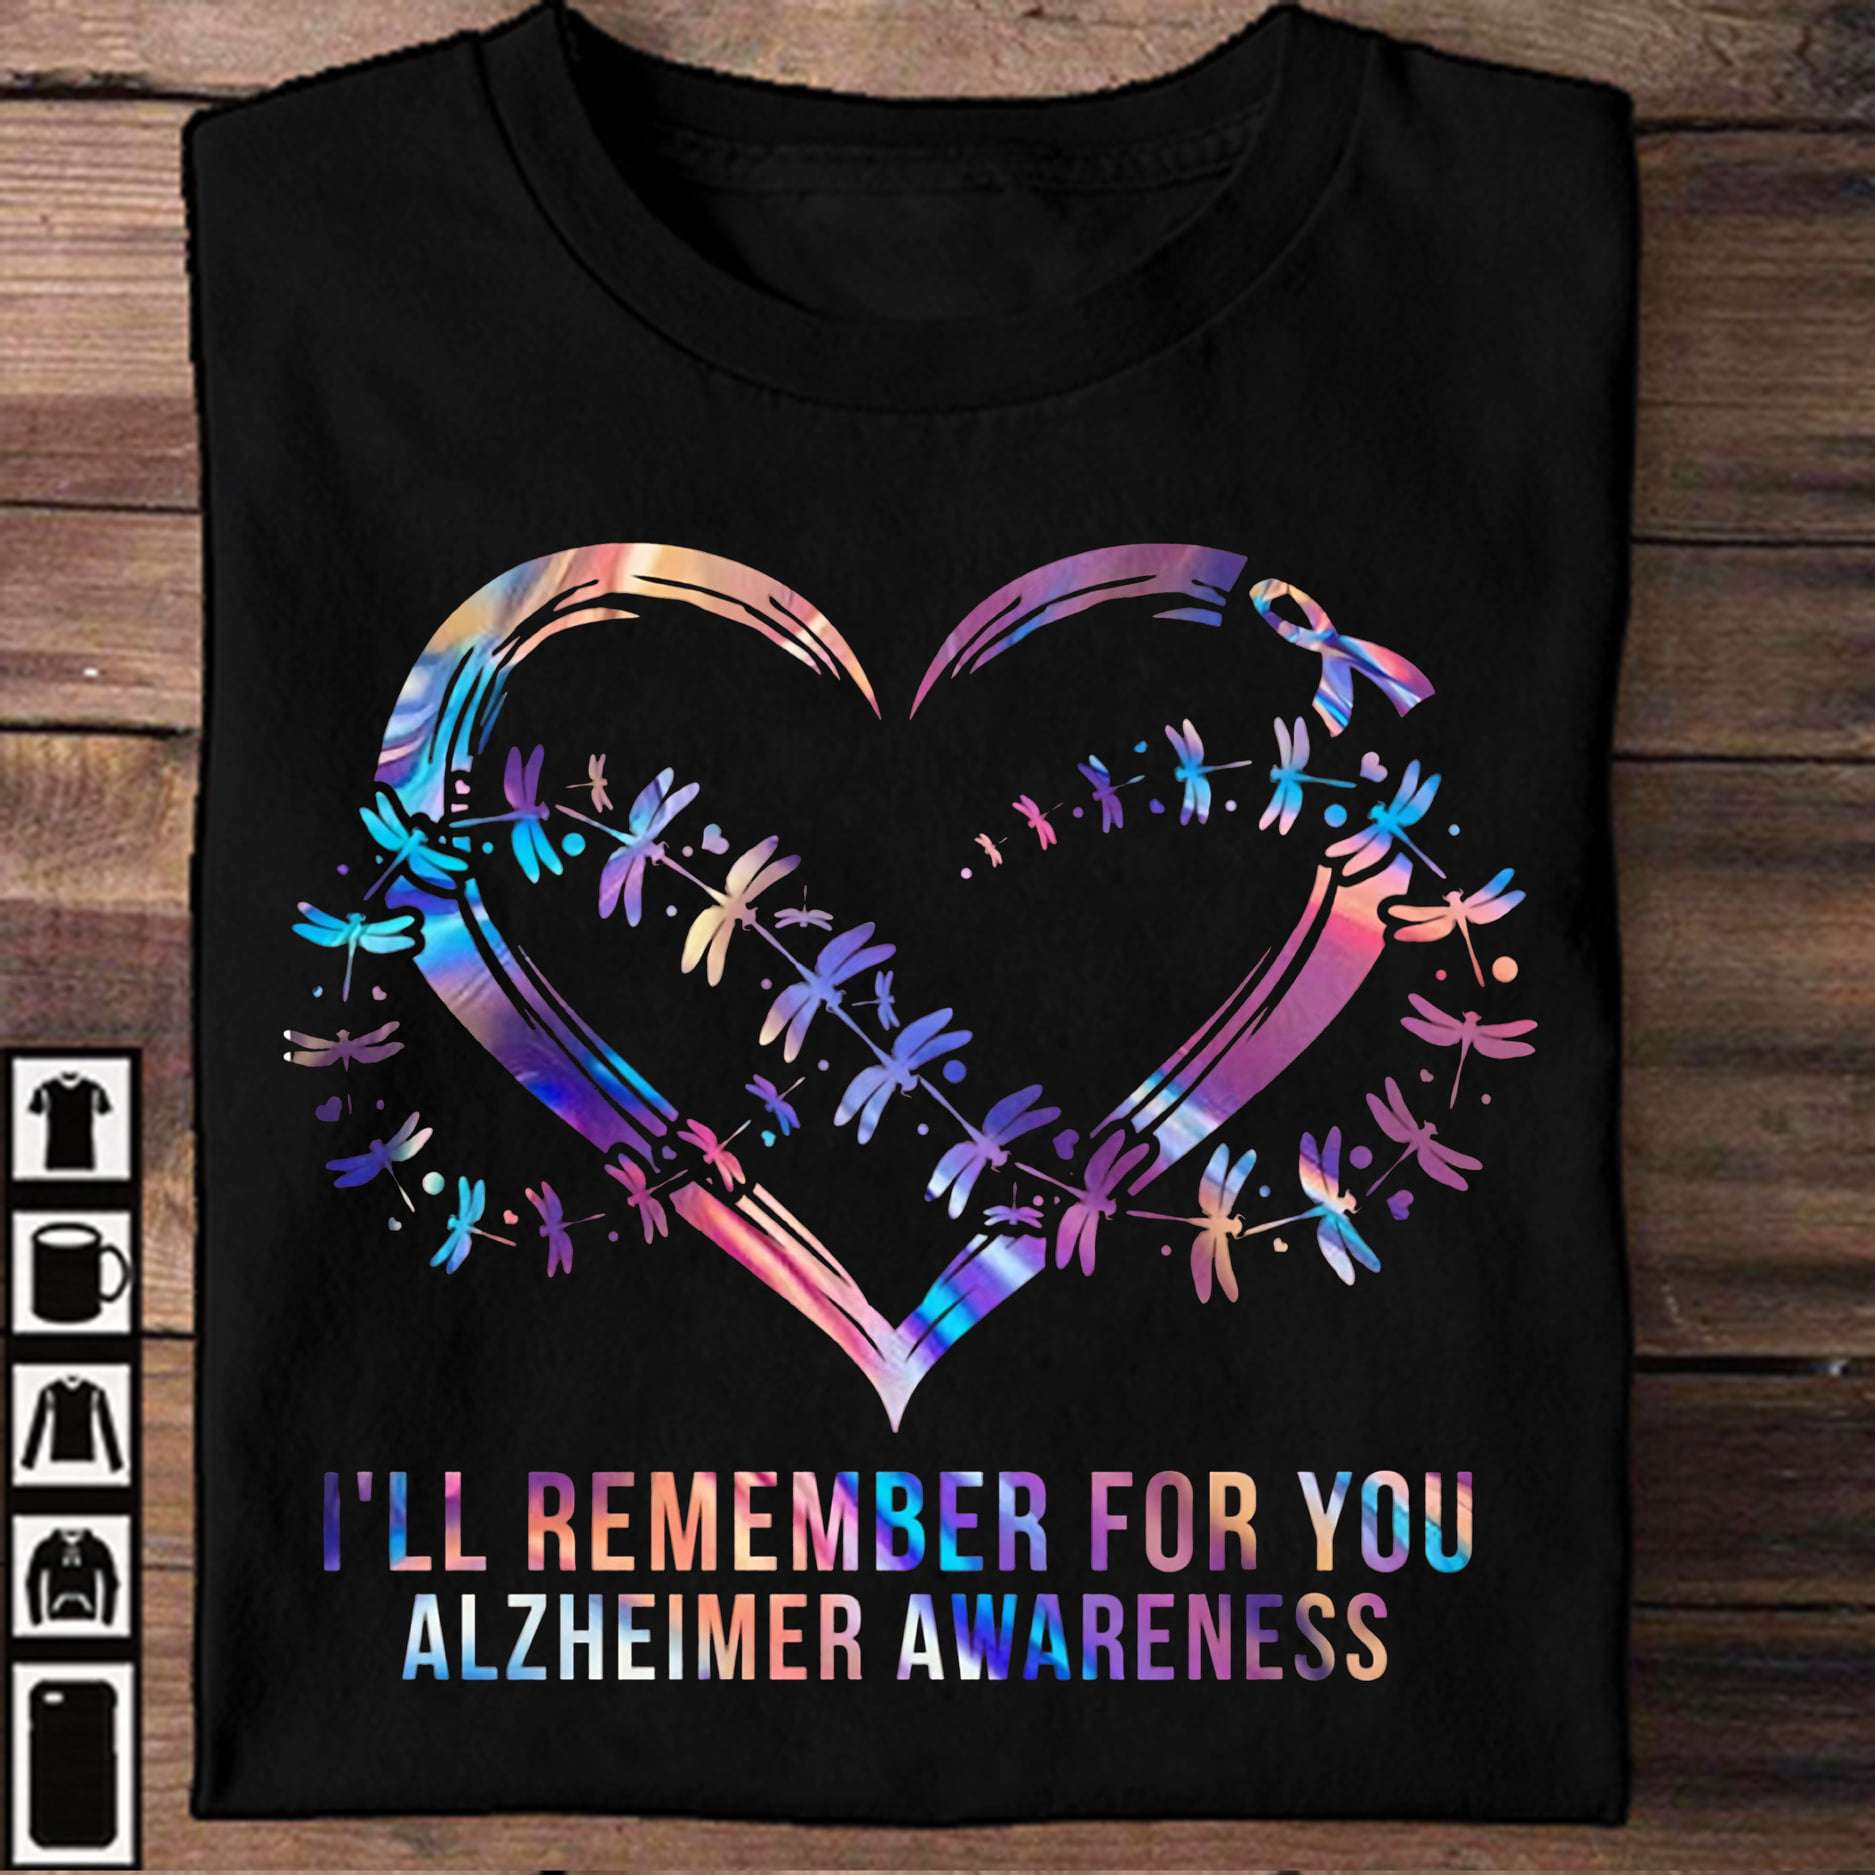 I'll remember for you - Alzheimer awareness, dragonfly the animal